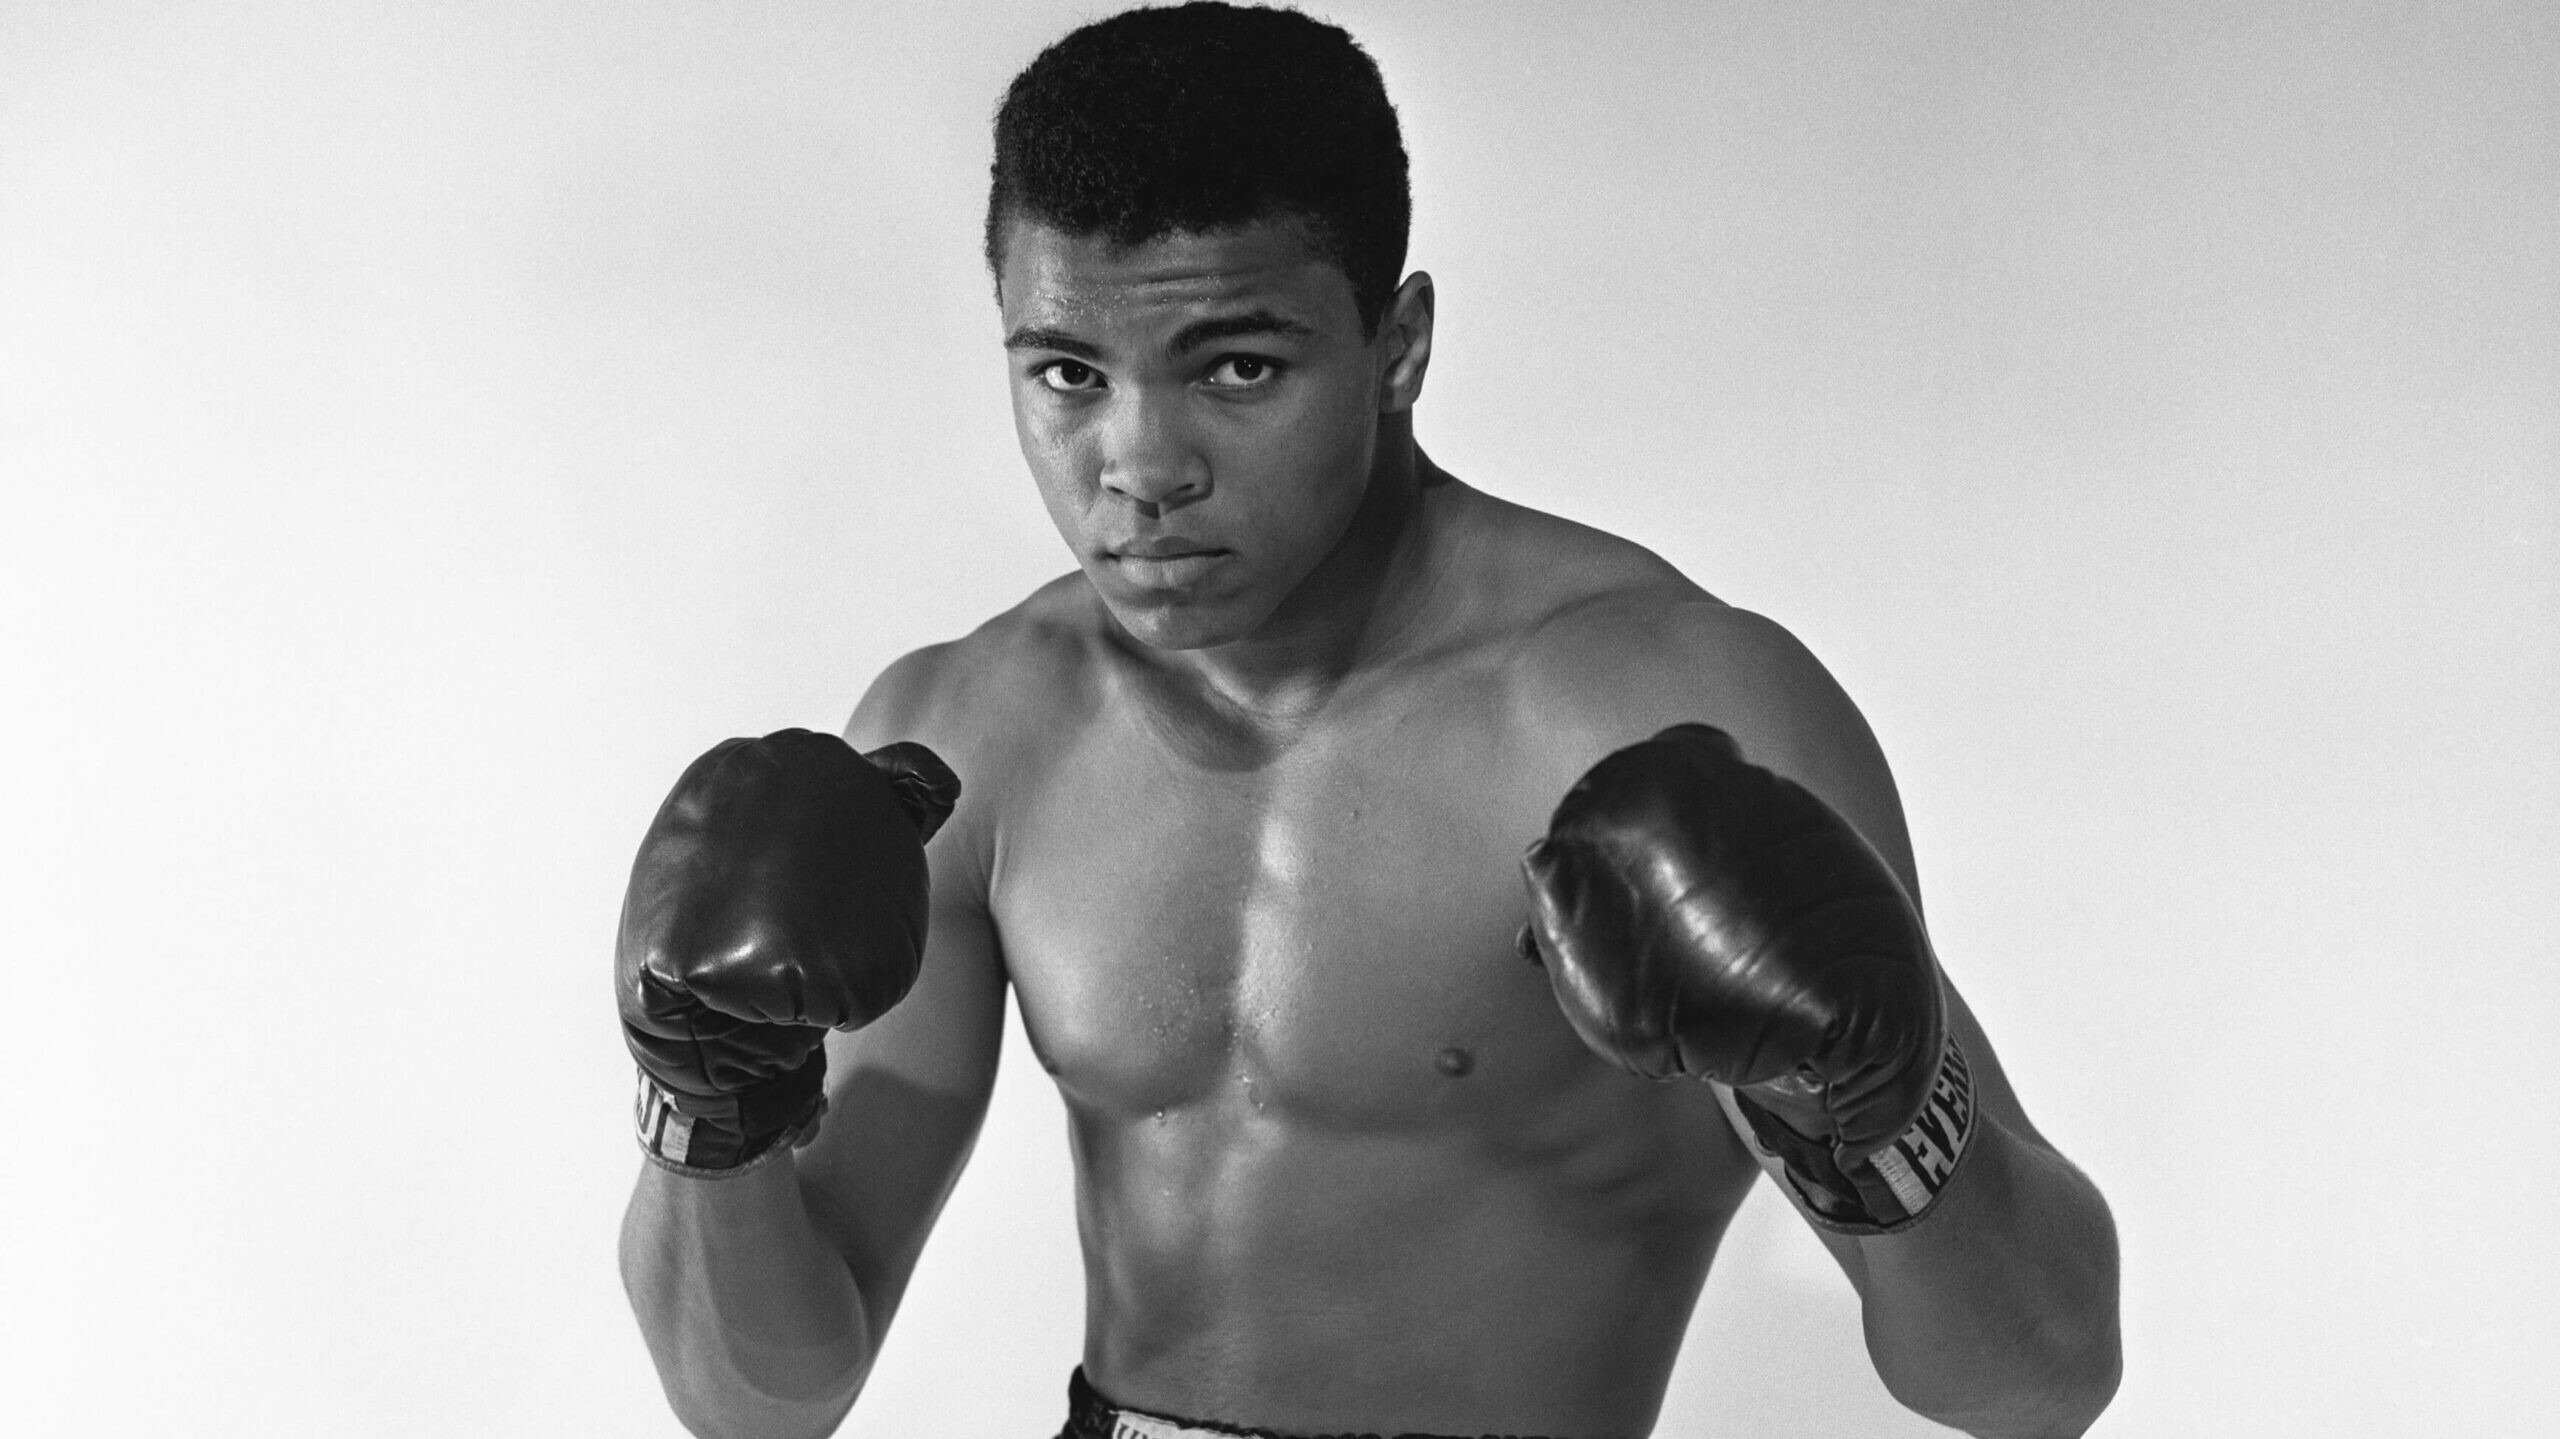 Muhammad Ali: Frequently ranked as the greatest heavyweight boxer of all time. 2560x1440 HD Wallpaper.